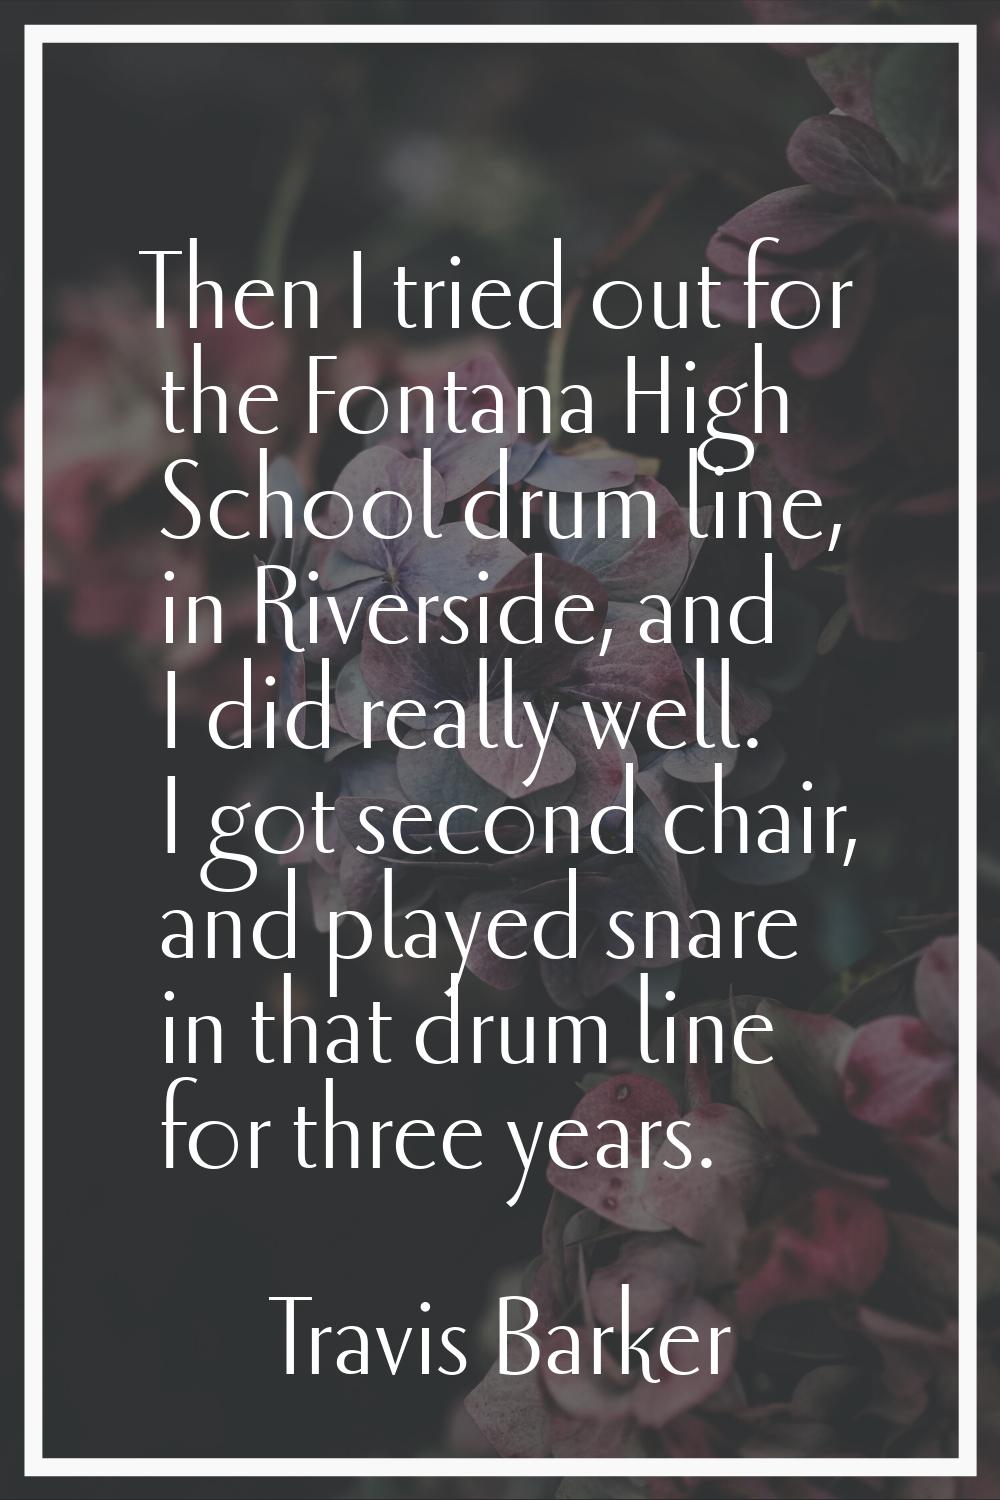 Then I tried out for the Fontana High School drum line, in Riverside, and I did really well. I got 